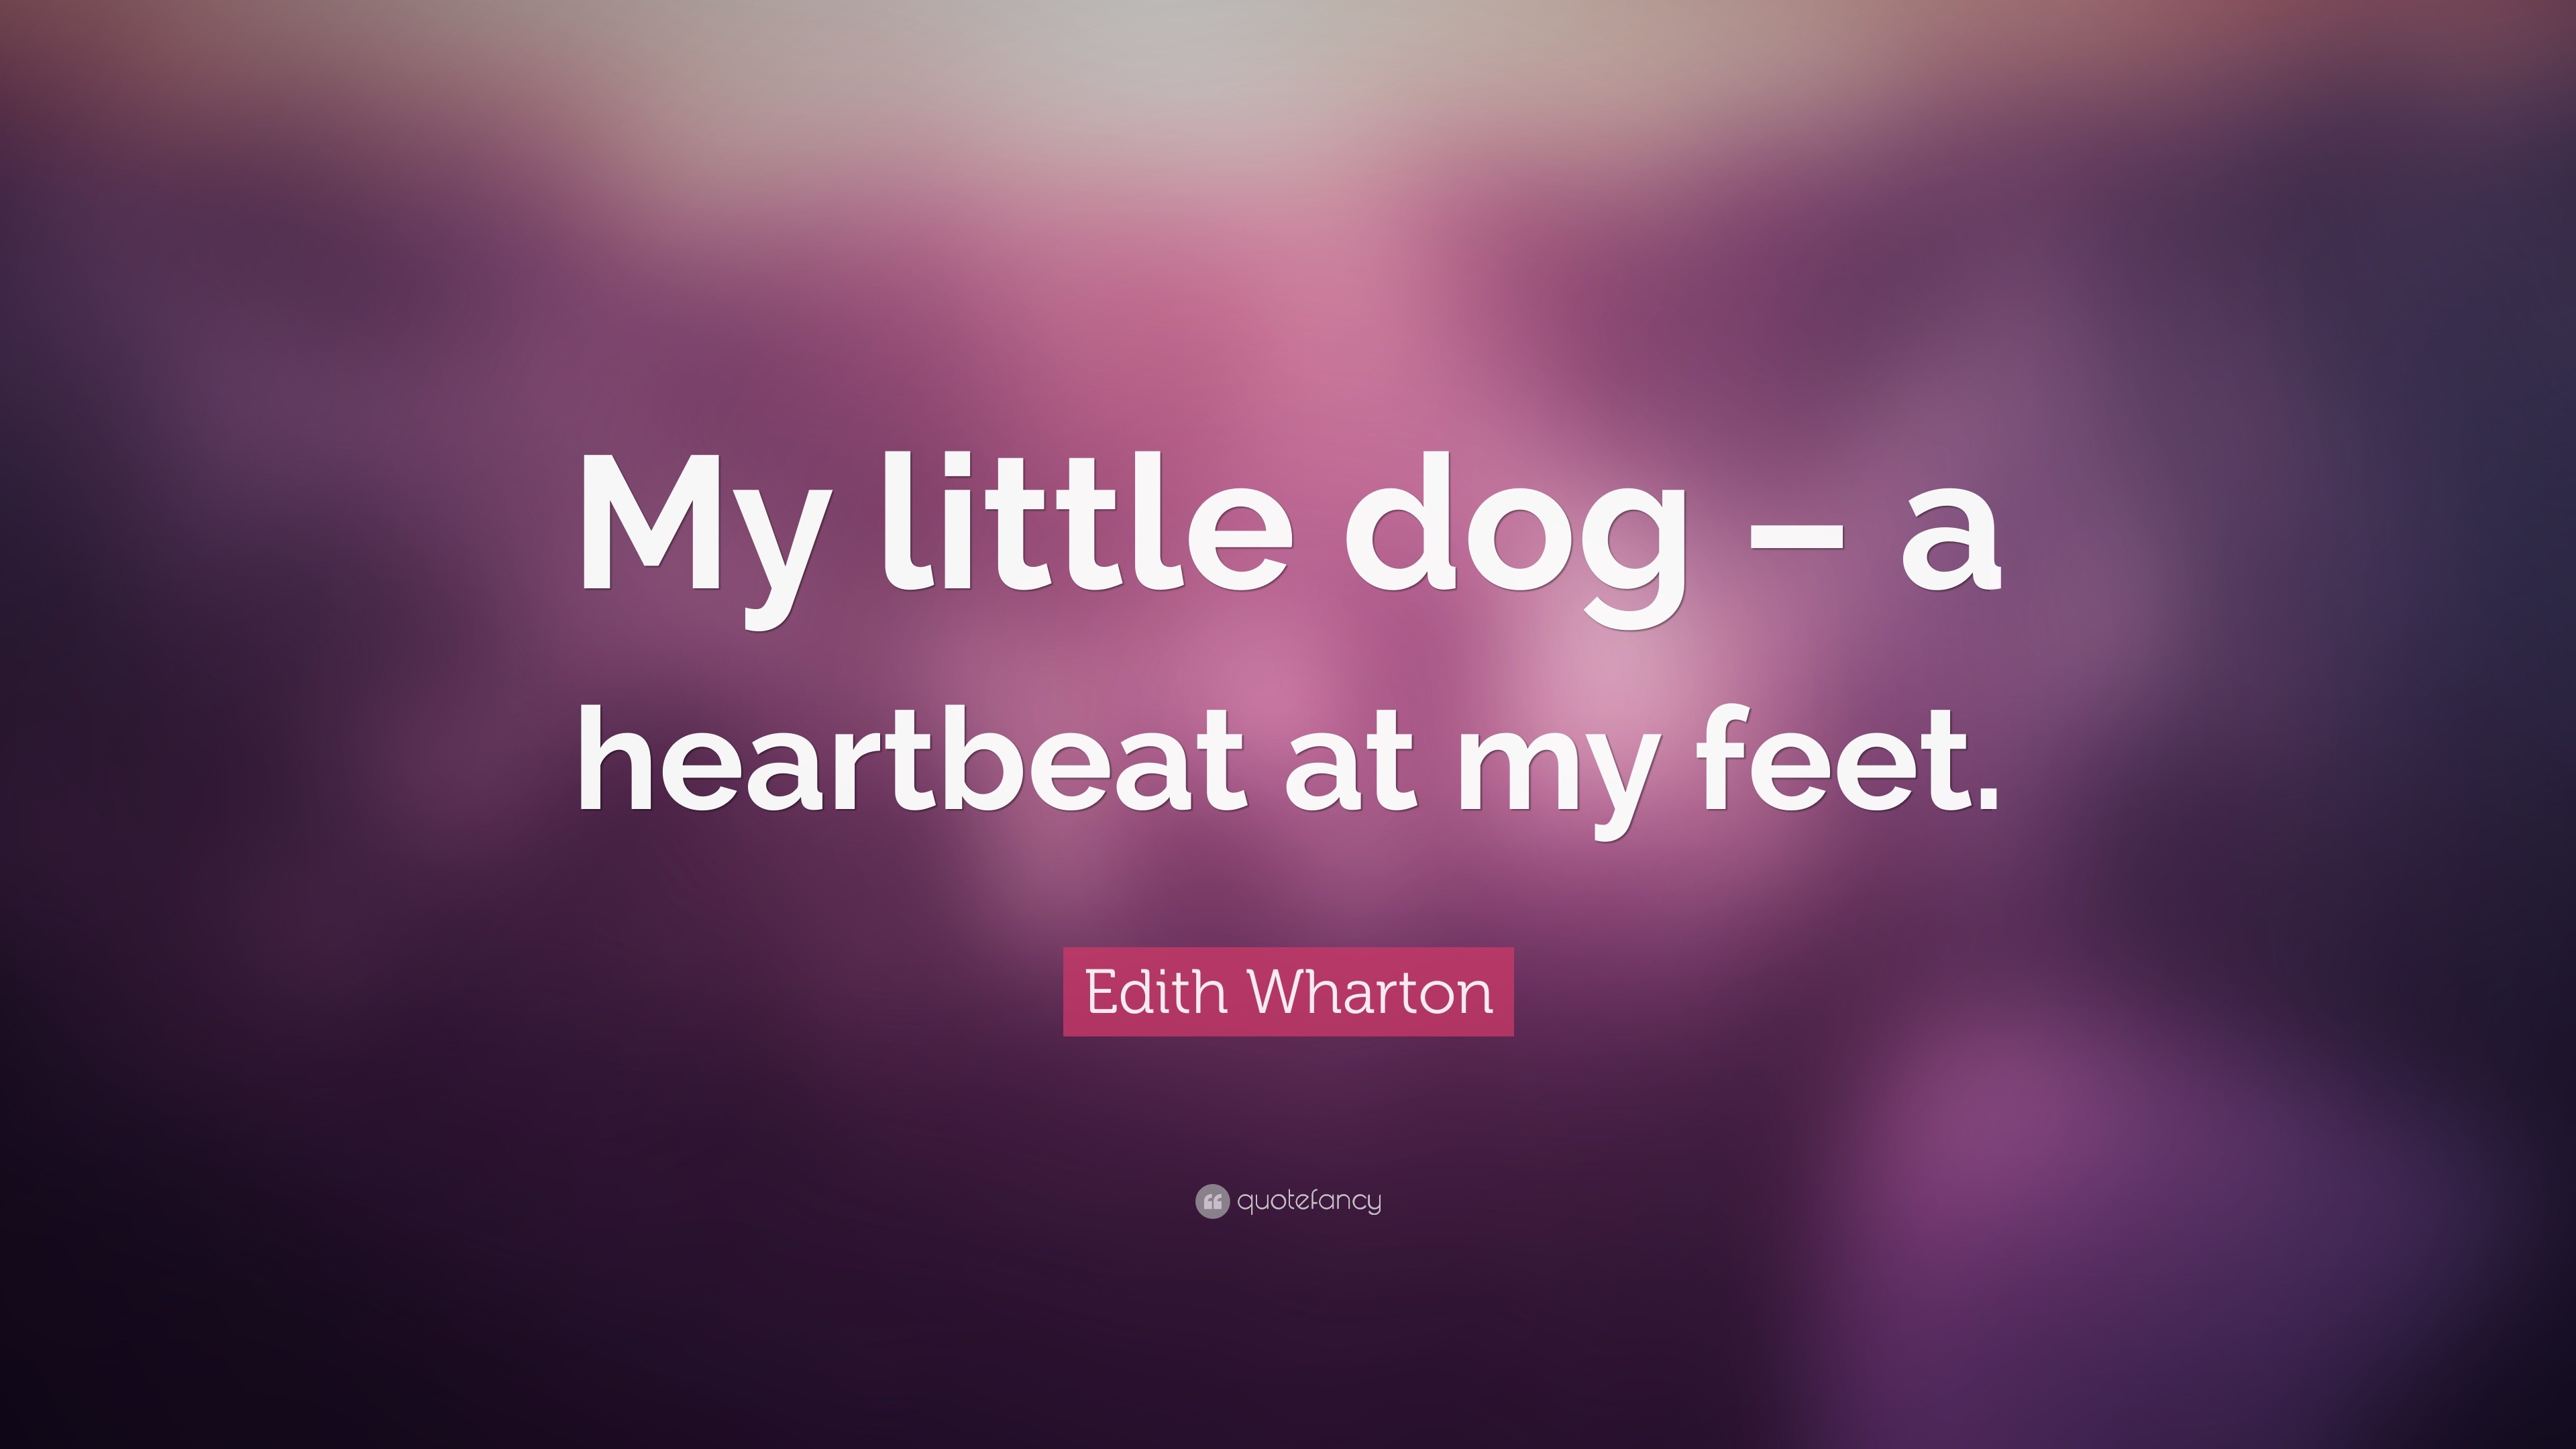 Edith Wharton Quote My little dog a heartbeat at my feet.